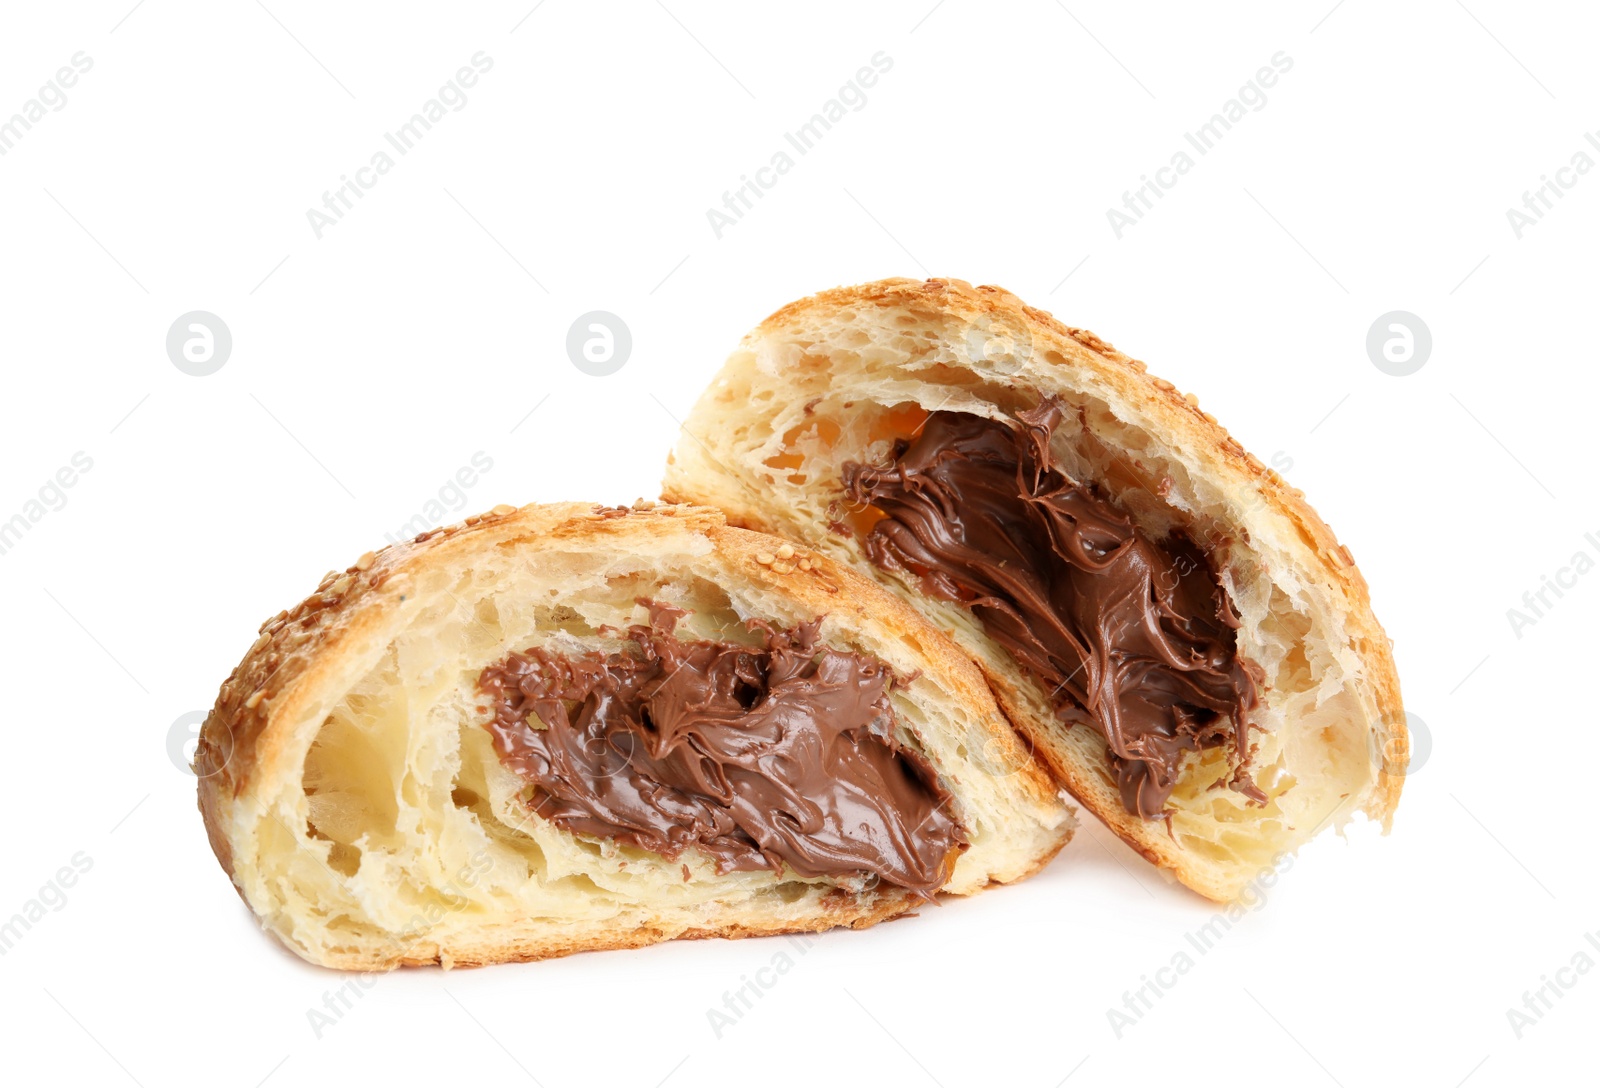 Photo of Halves of tasty croissant with chocolate and sesame seeds on white background